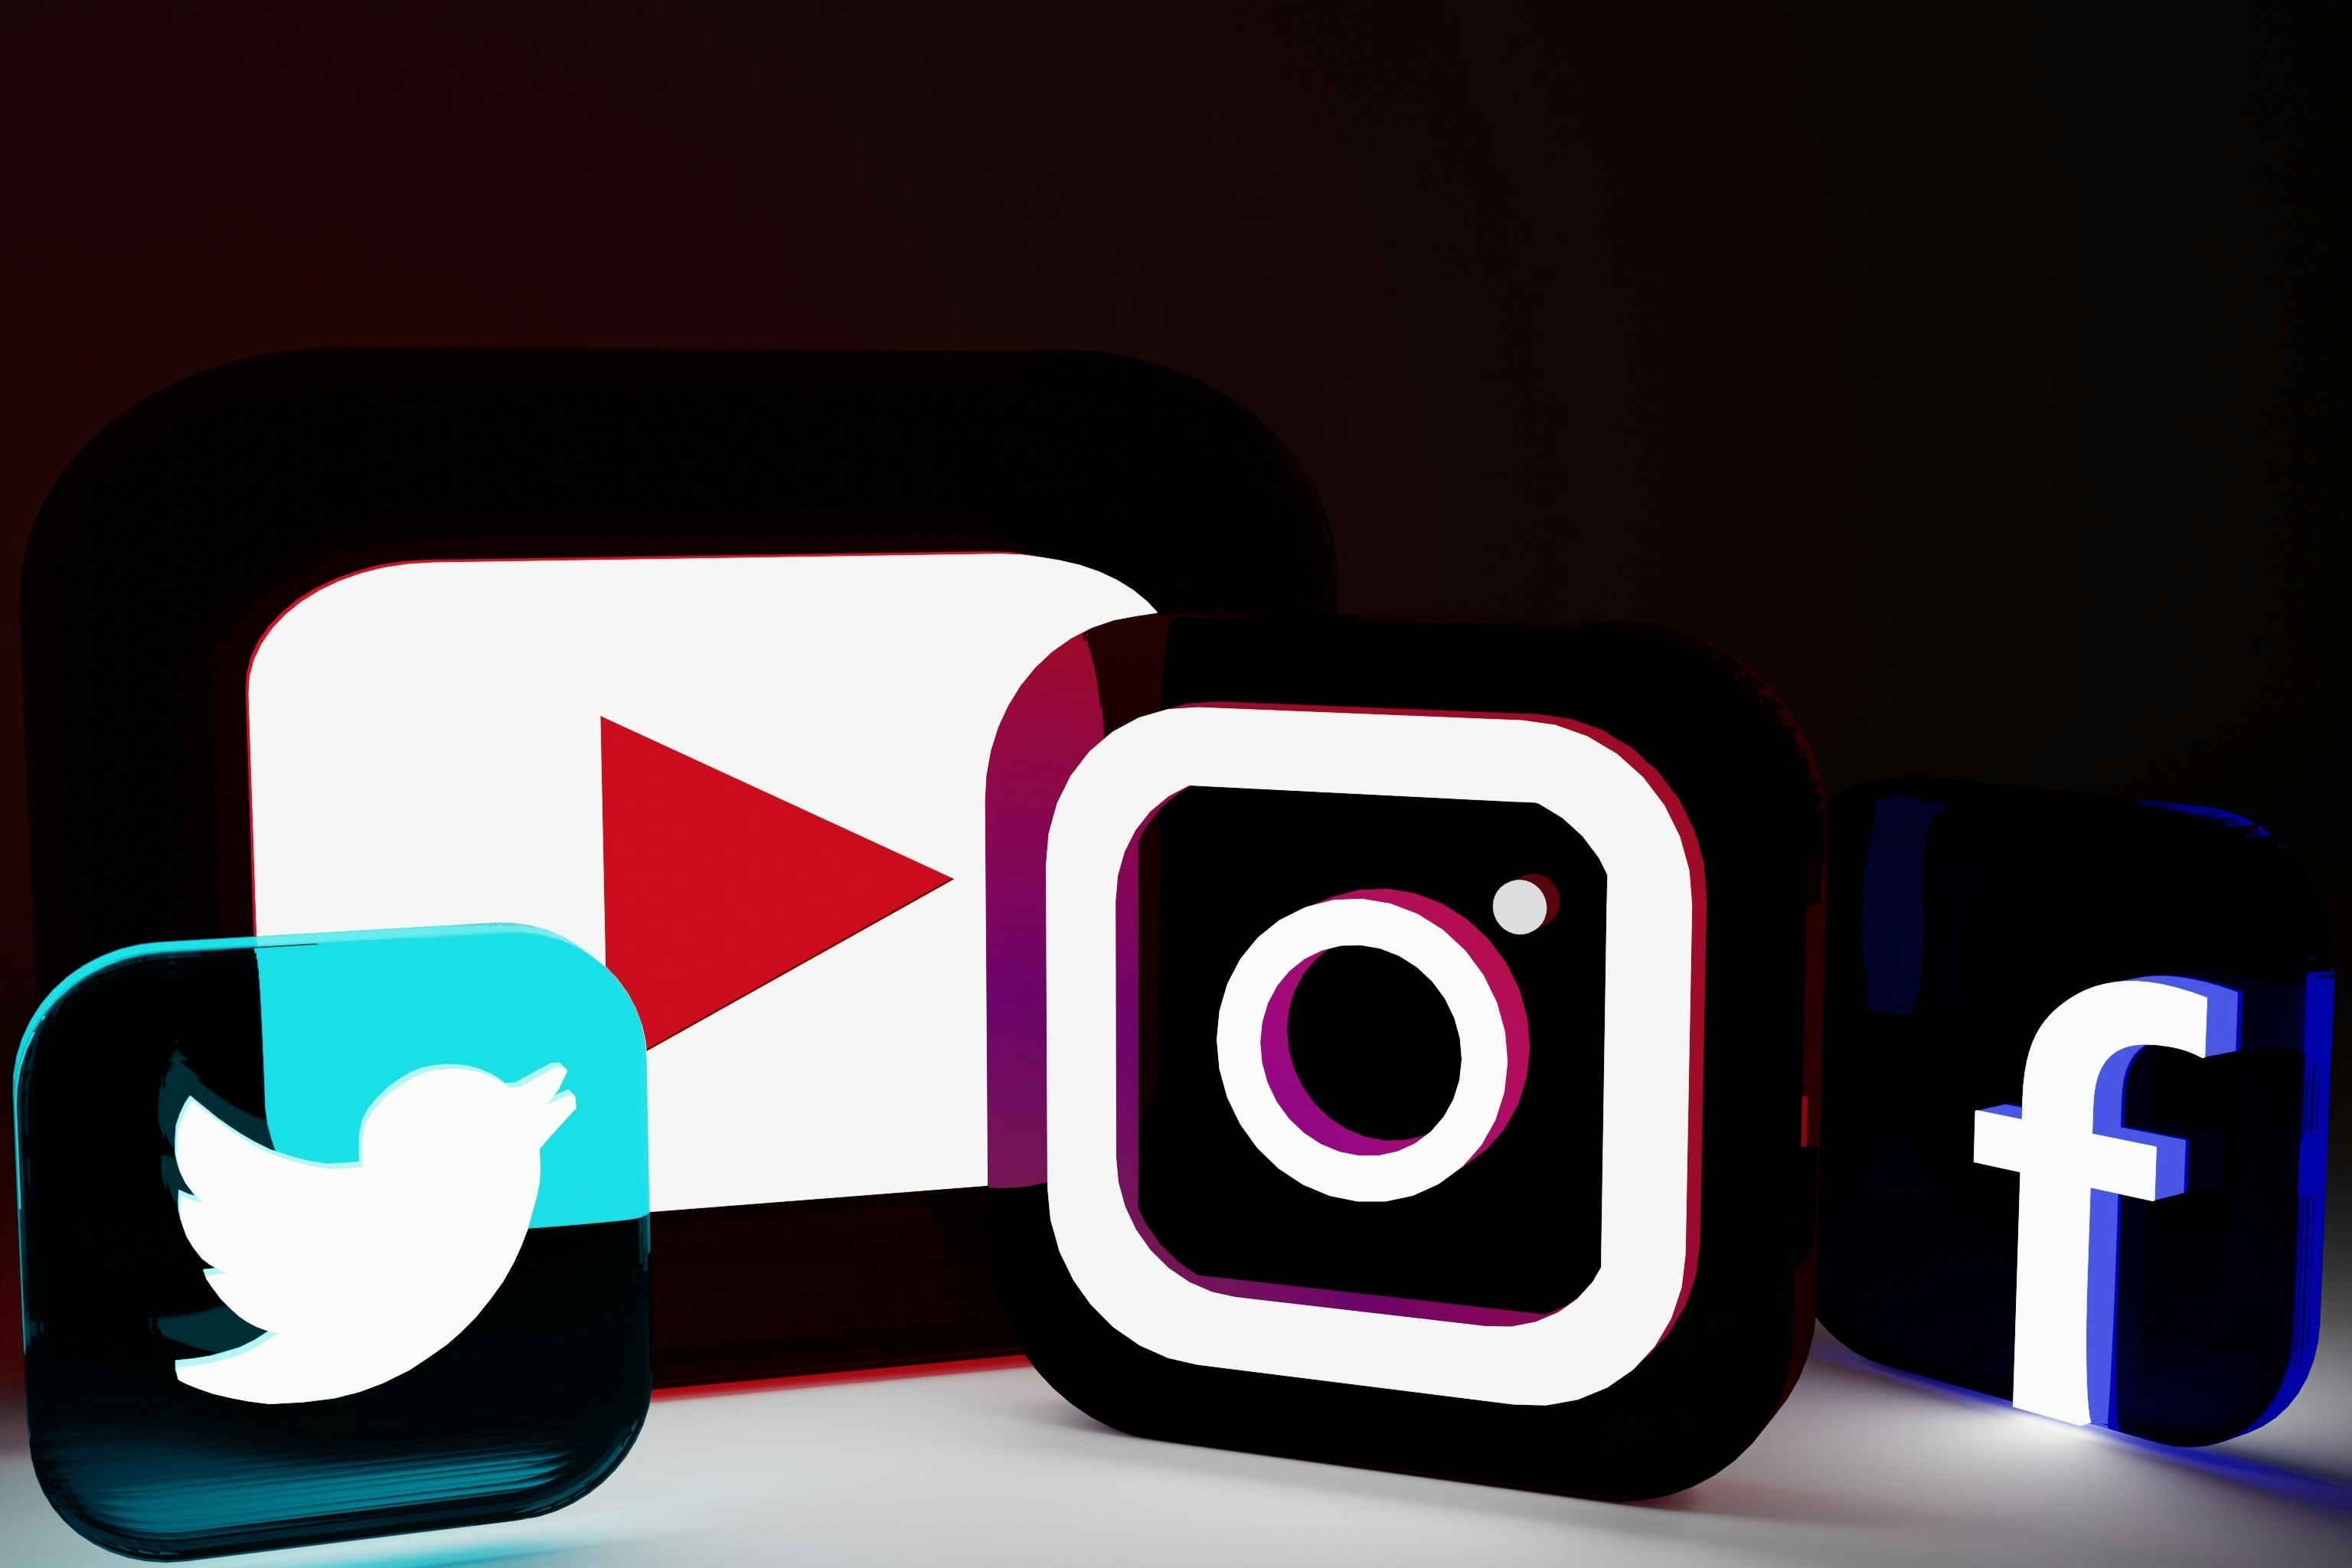 Logos of popular social media sites are displayed in translucent squares. From left to right, the logos are: Twitter, YouTube, Instagram, and Facebook